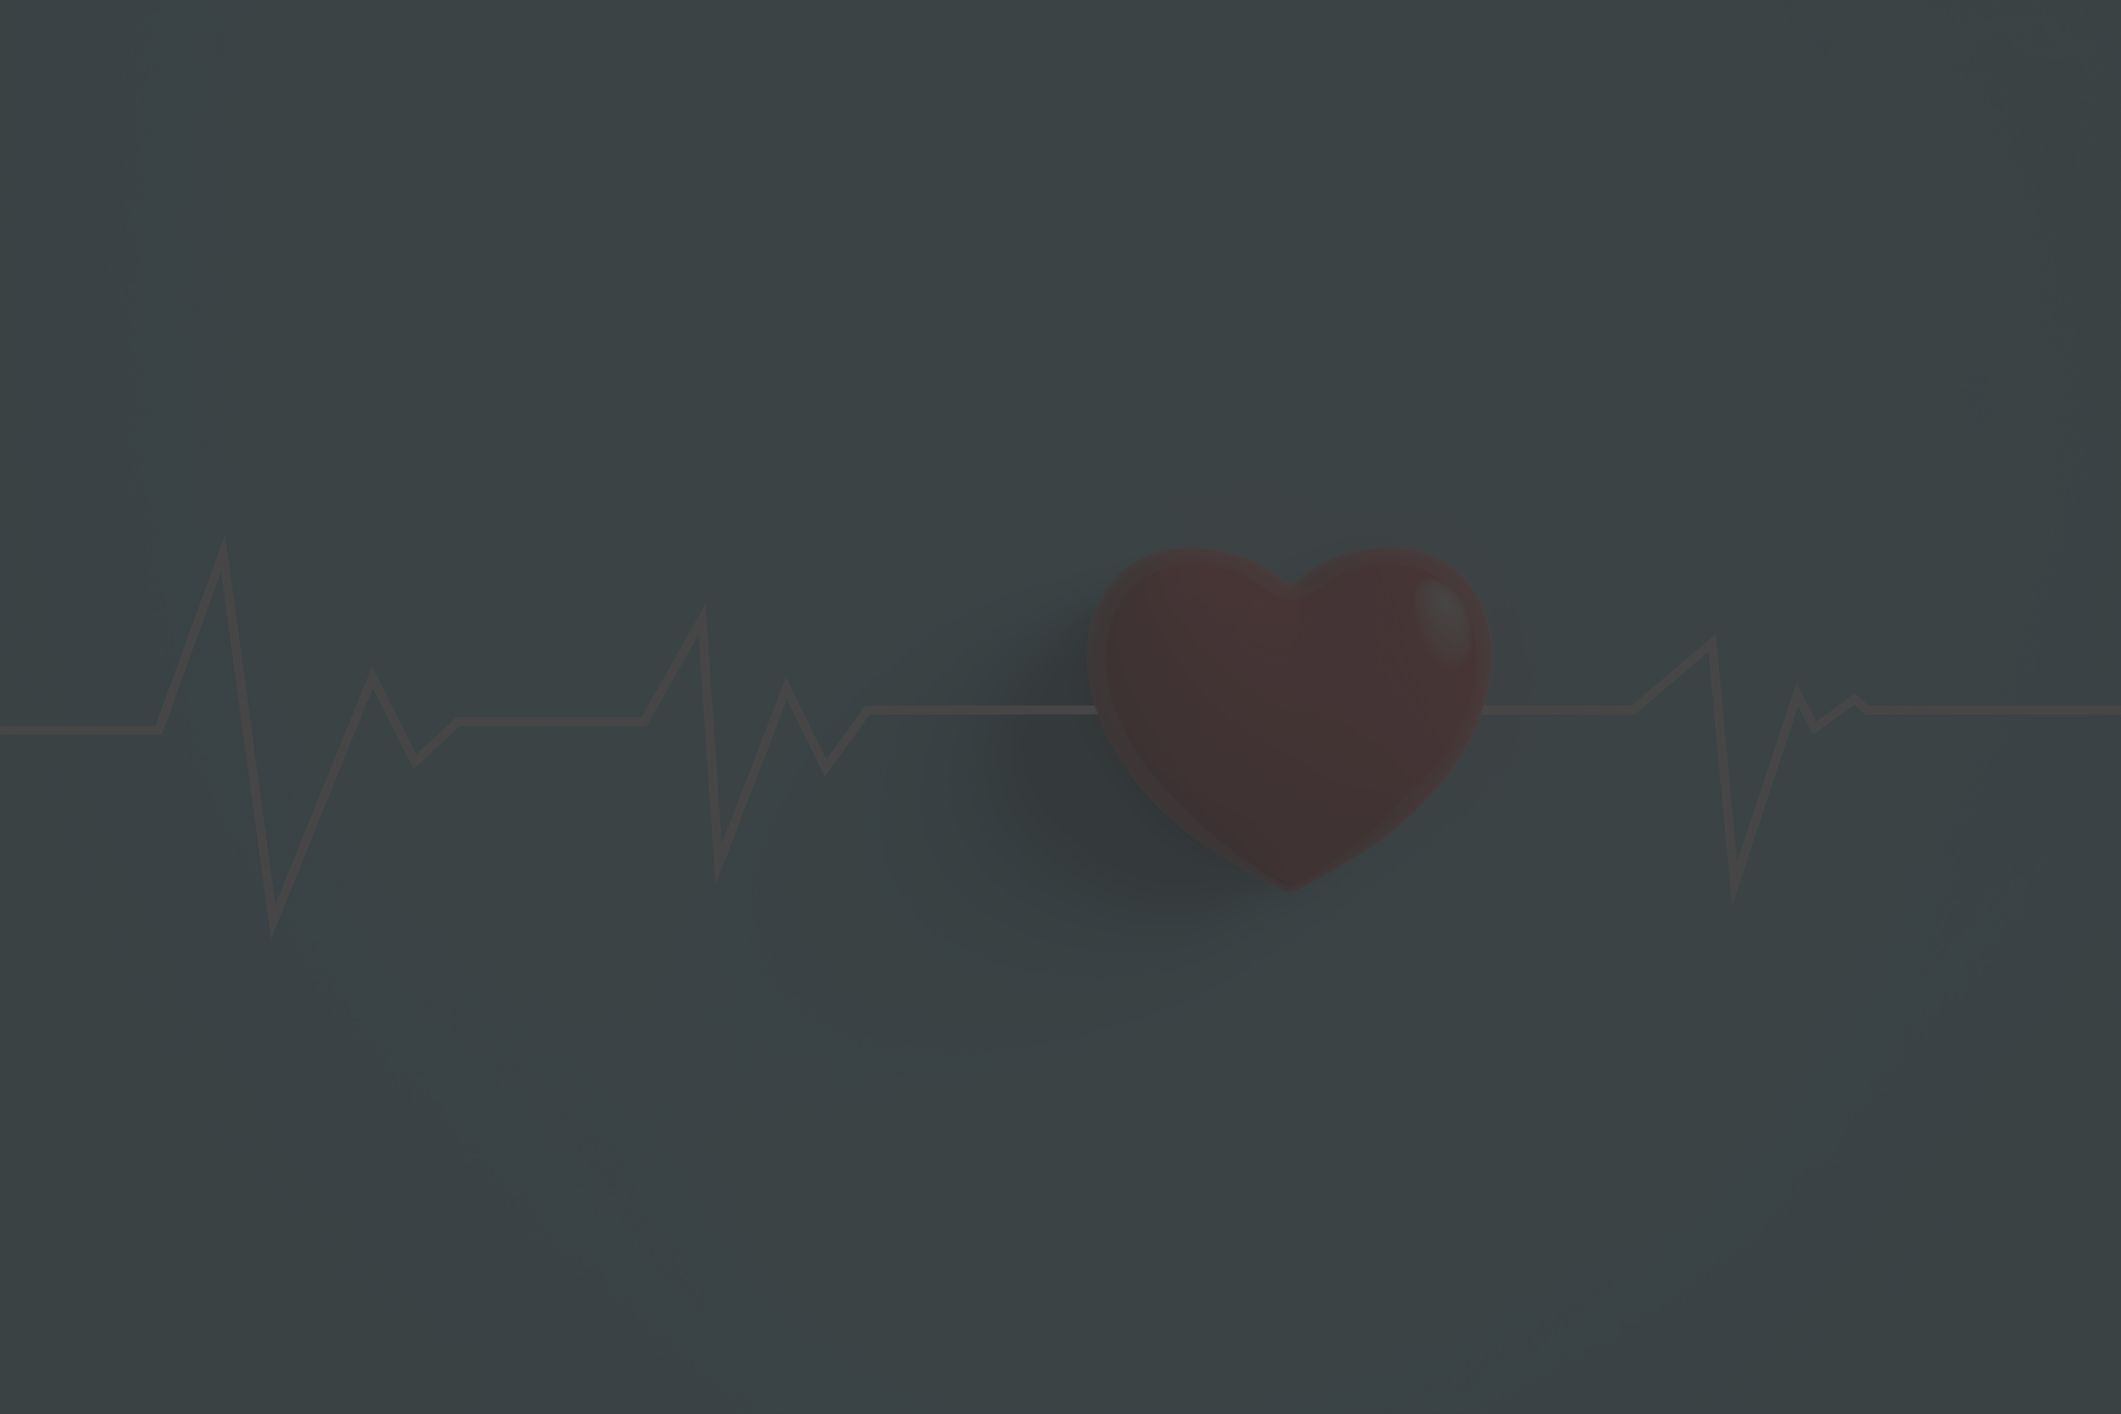 Cardiogram pulse trace with Red heart on pastel blue background